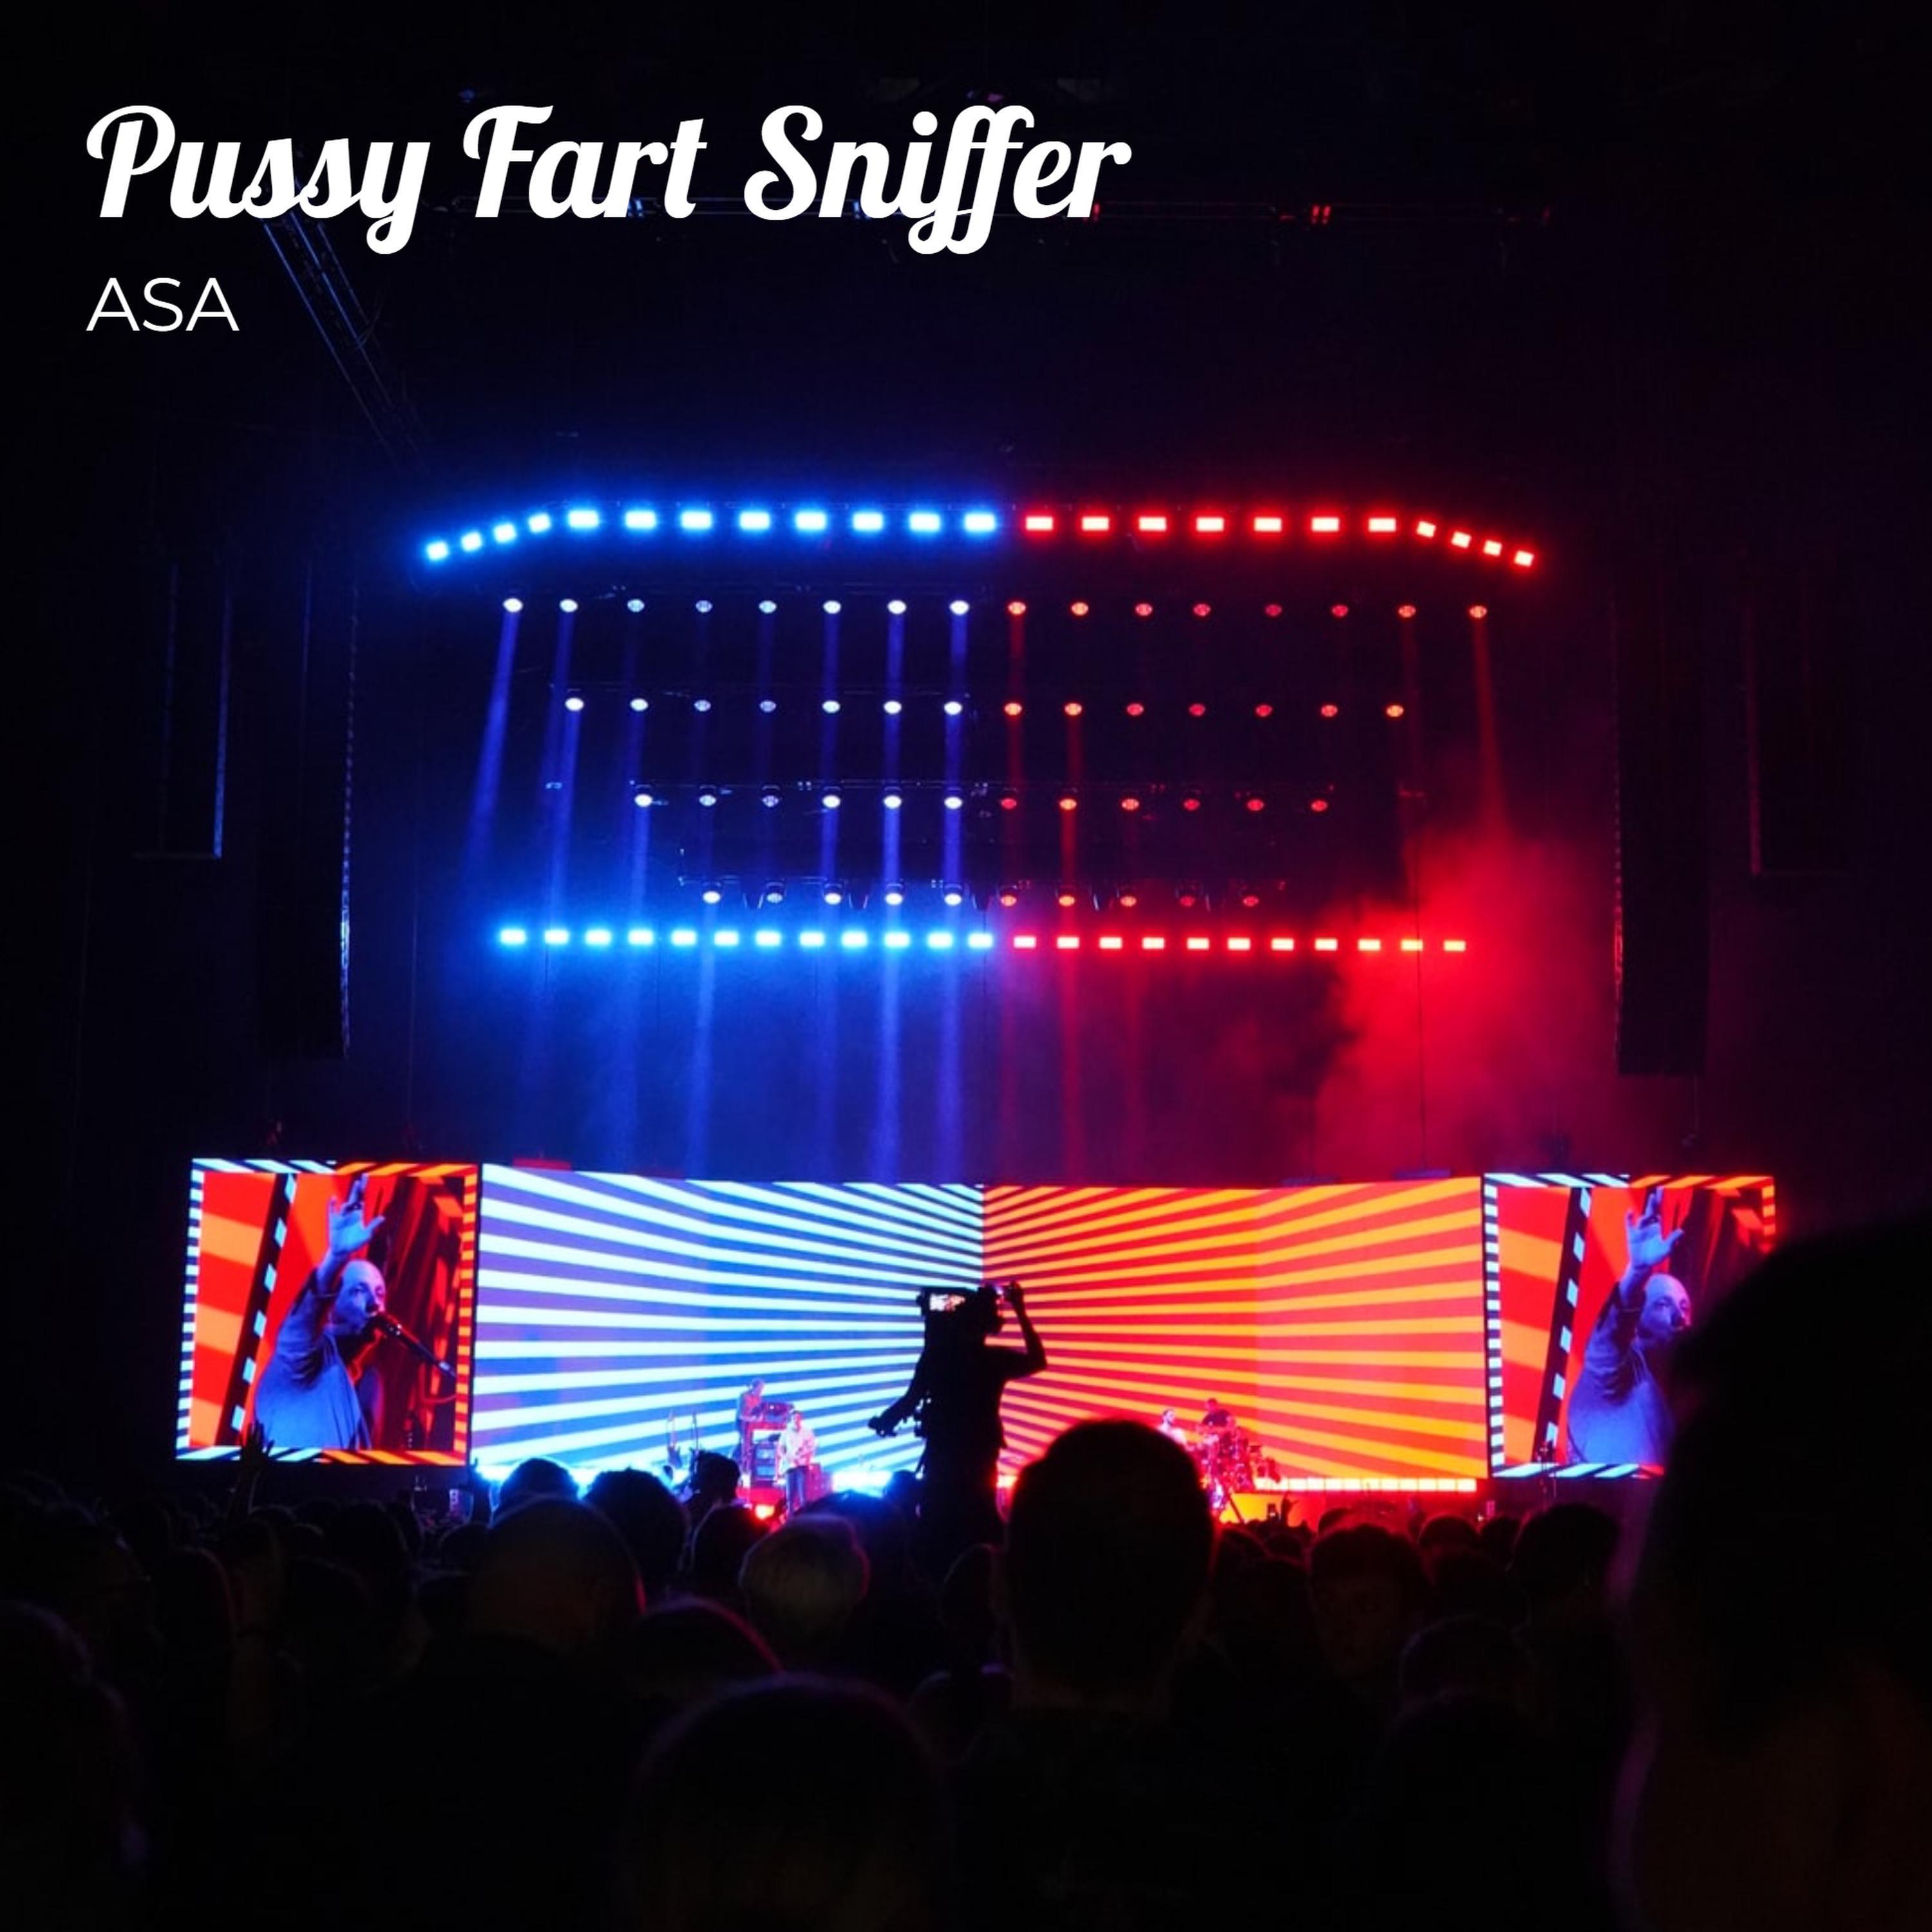 Asa - Pussy Fart Sniffer